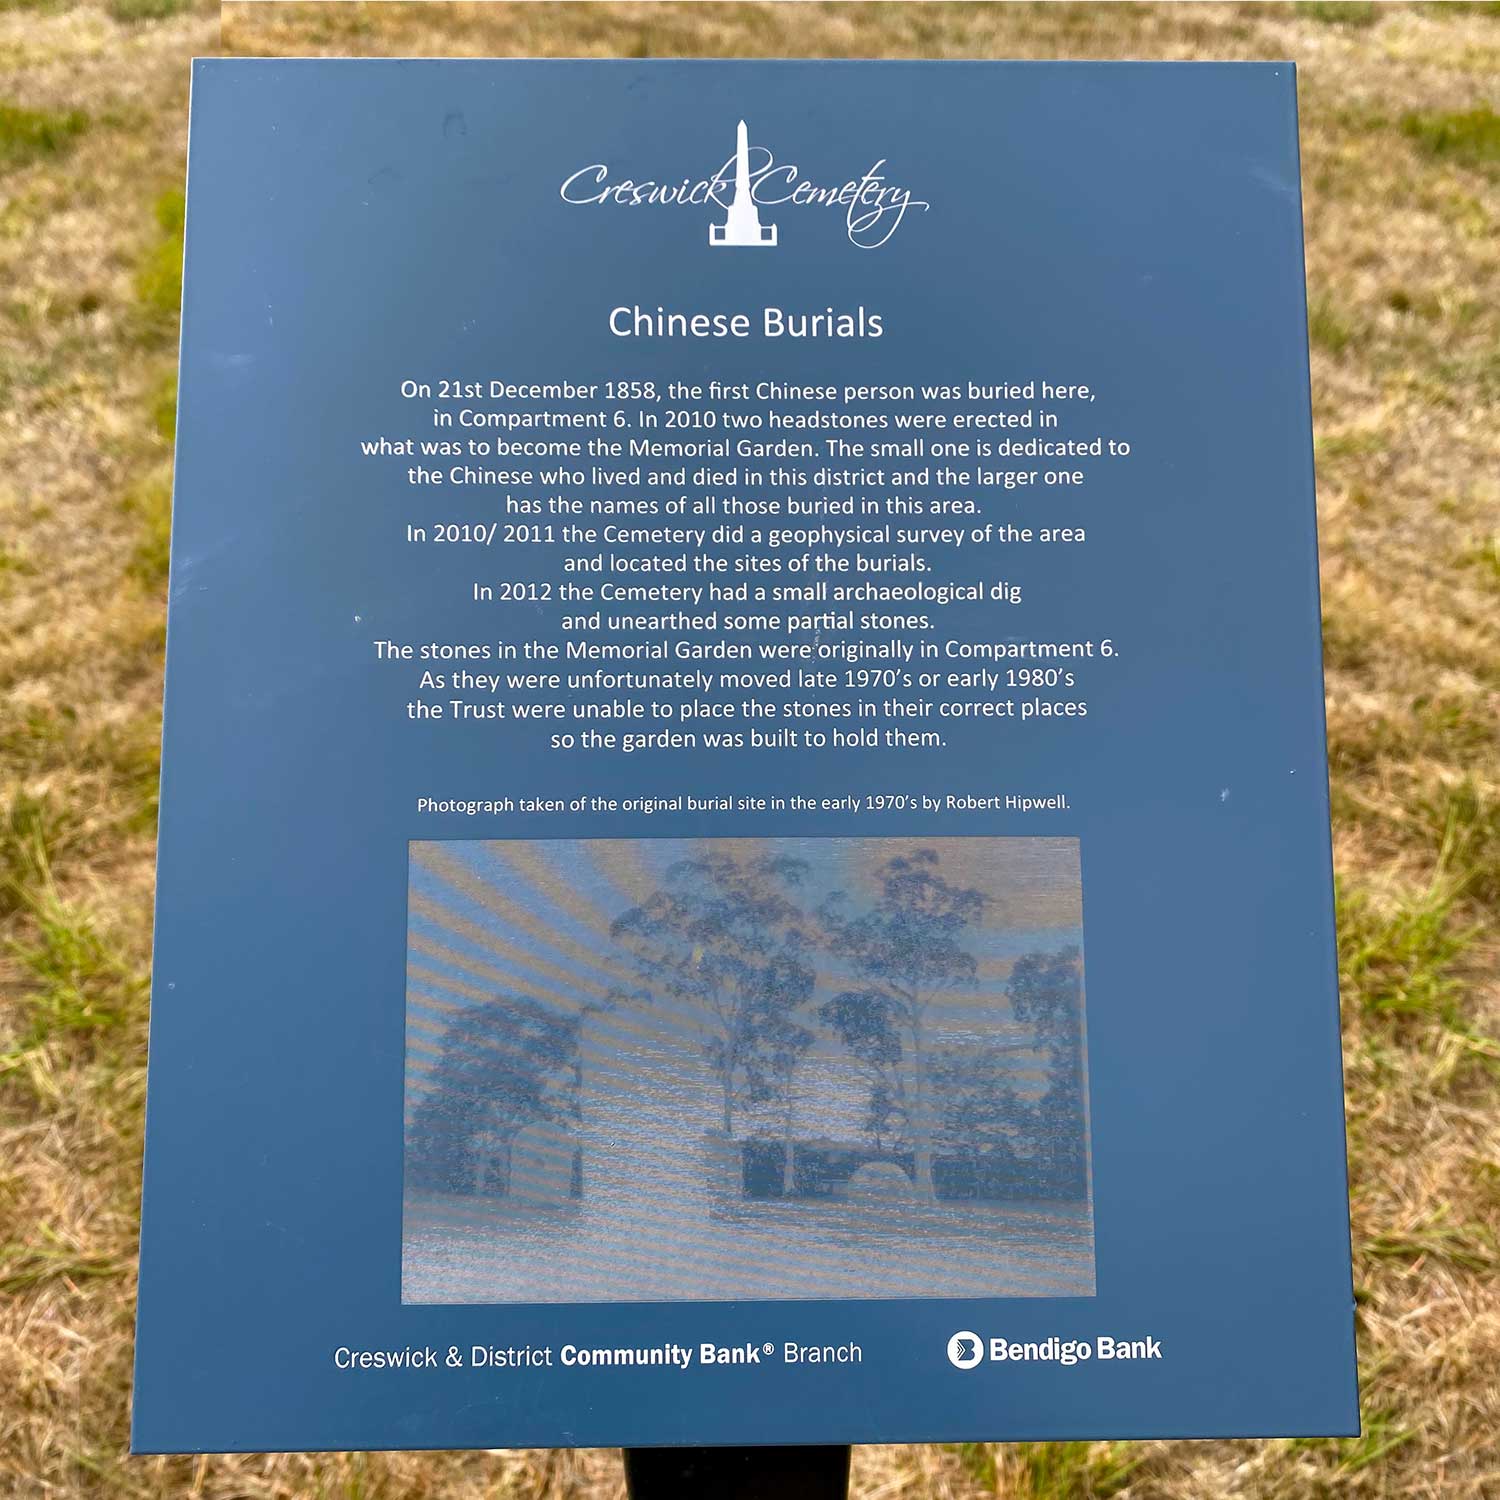 Dearly - Creswick Cemetery Chinese Burials